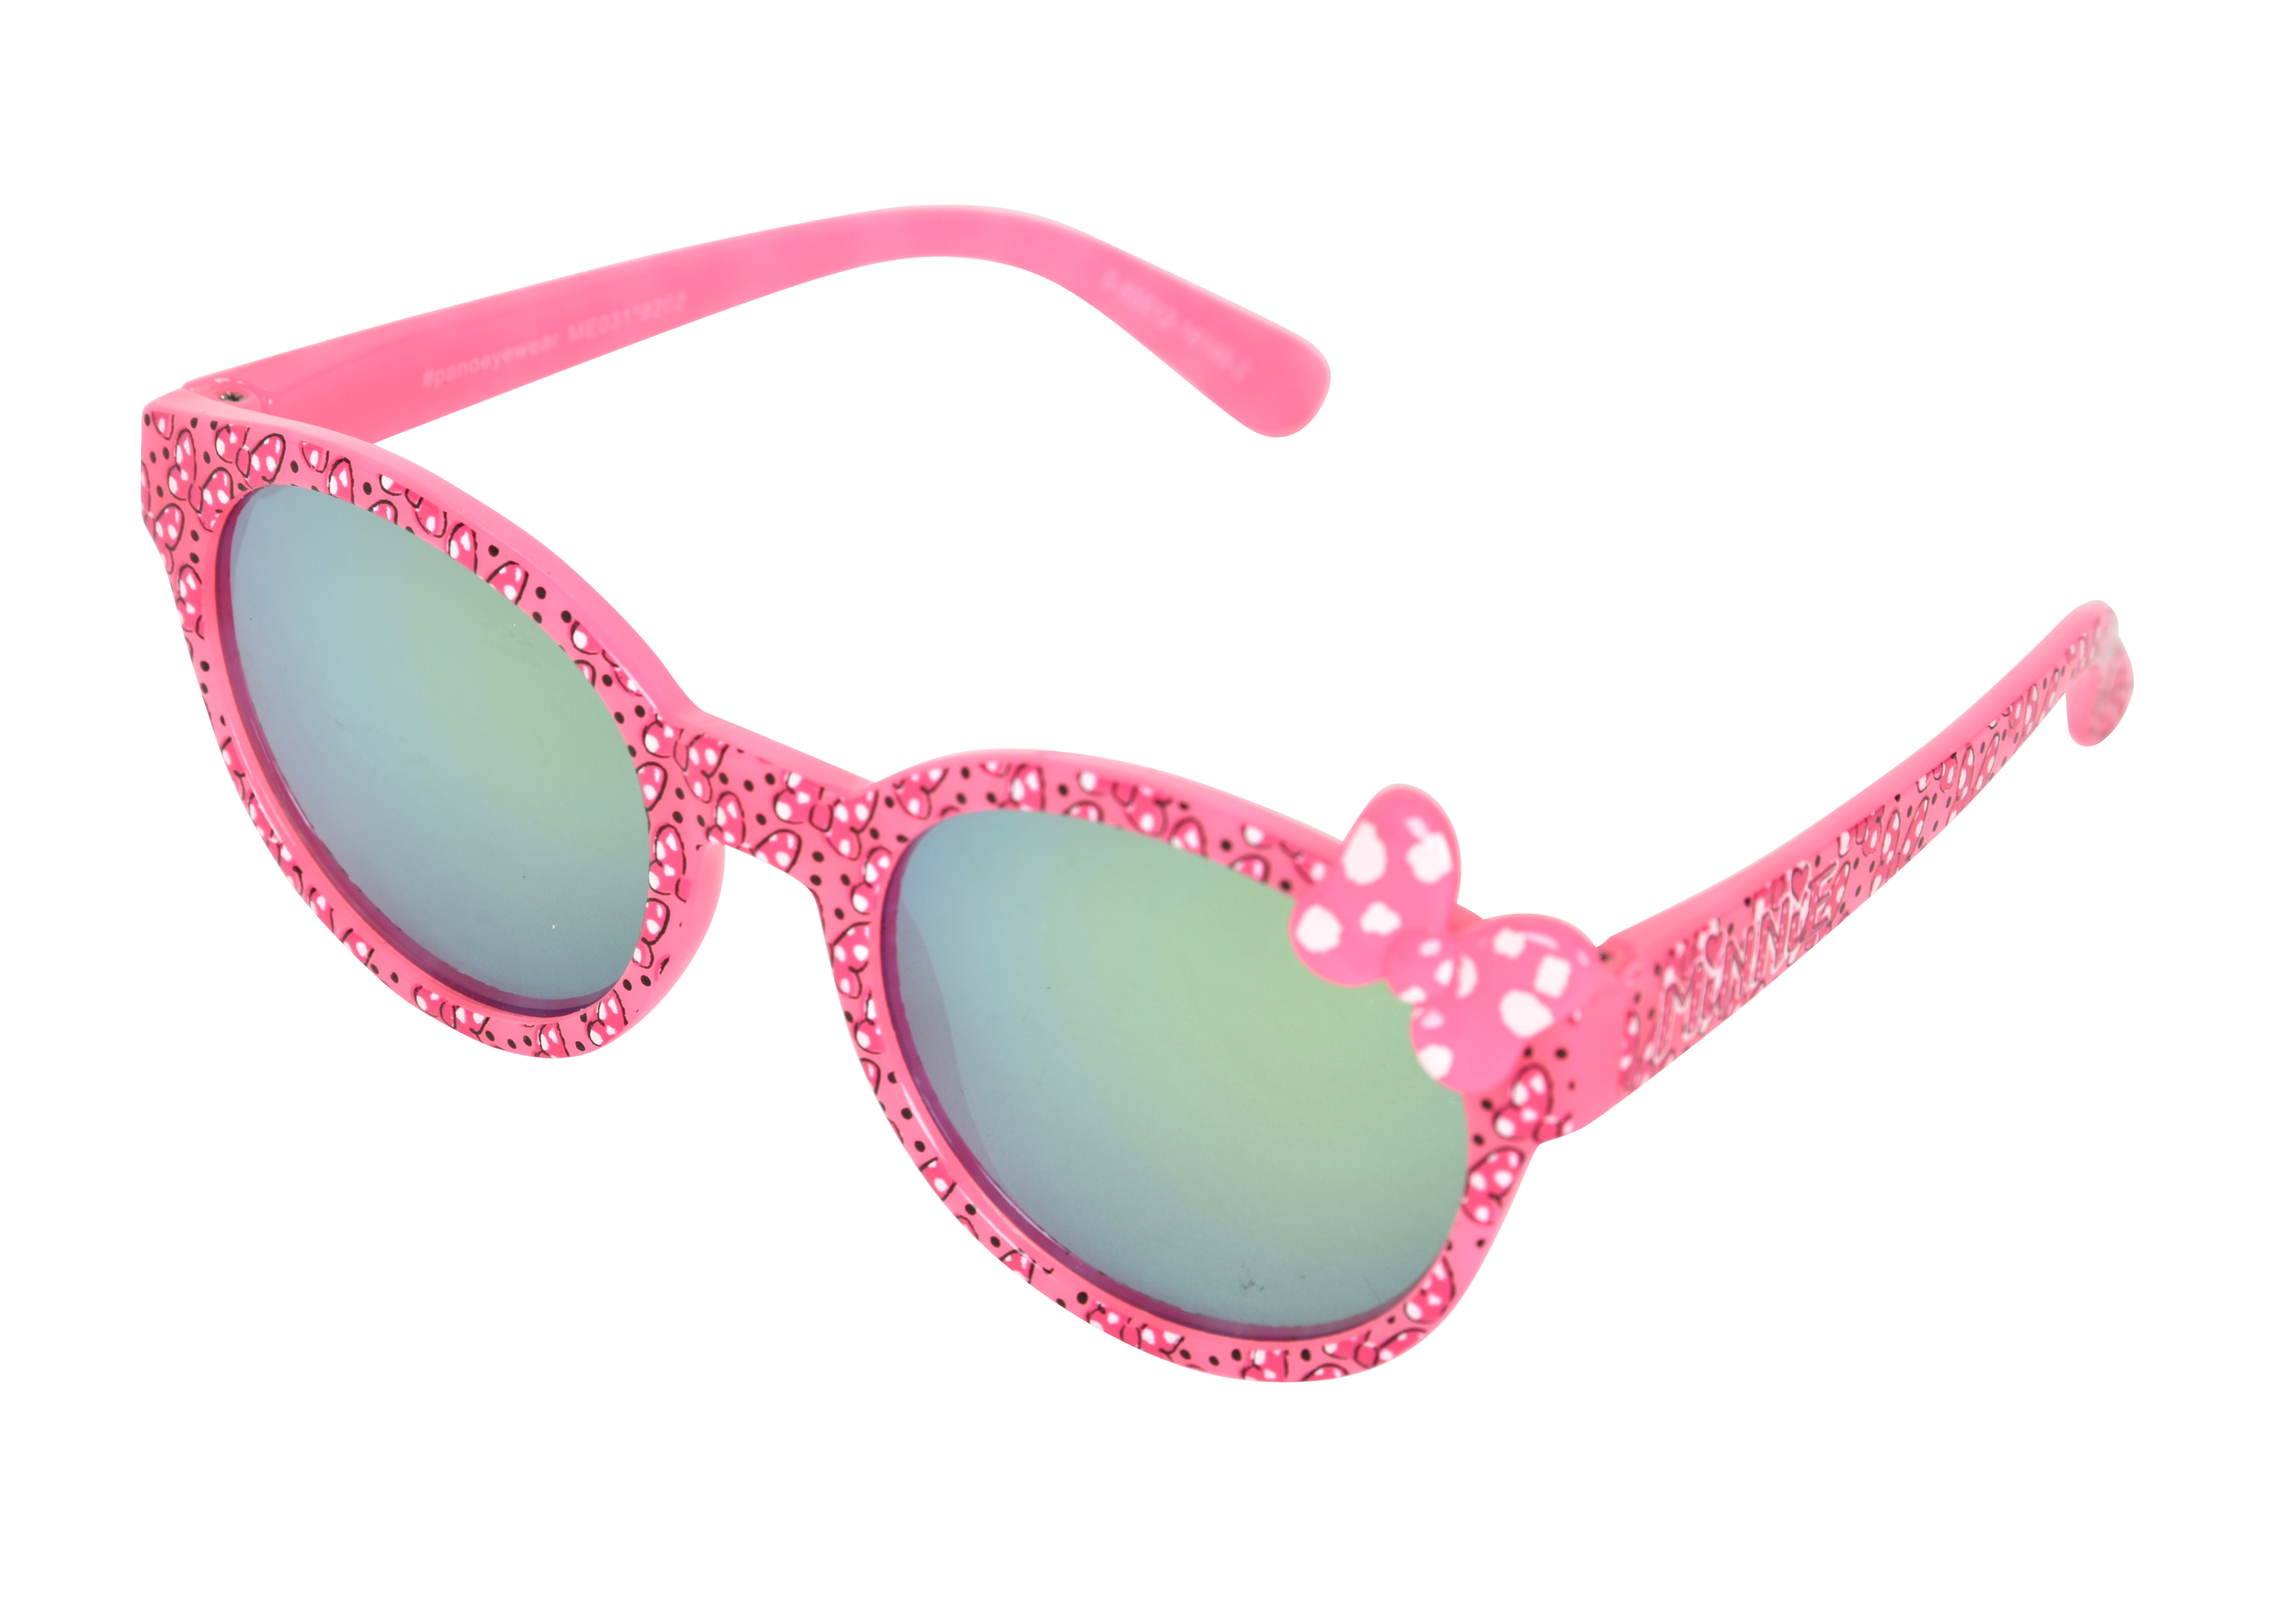 Disney Minnie Mouse Girl's Brow Bar Sunglasses Pink - image 1 of 3